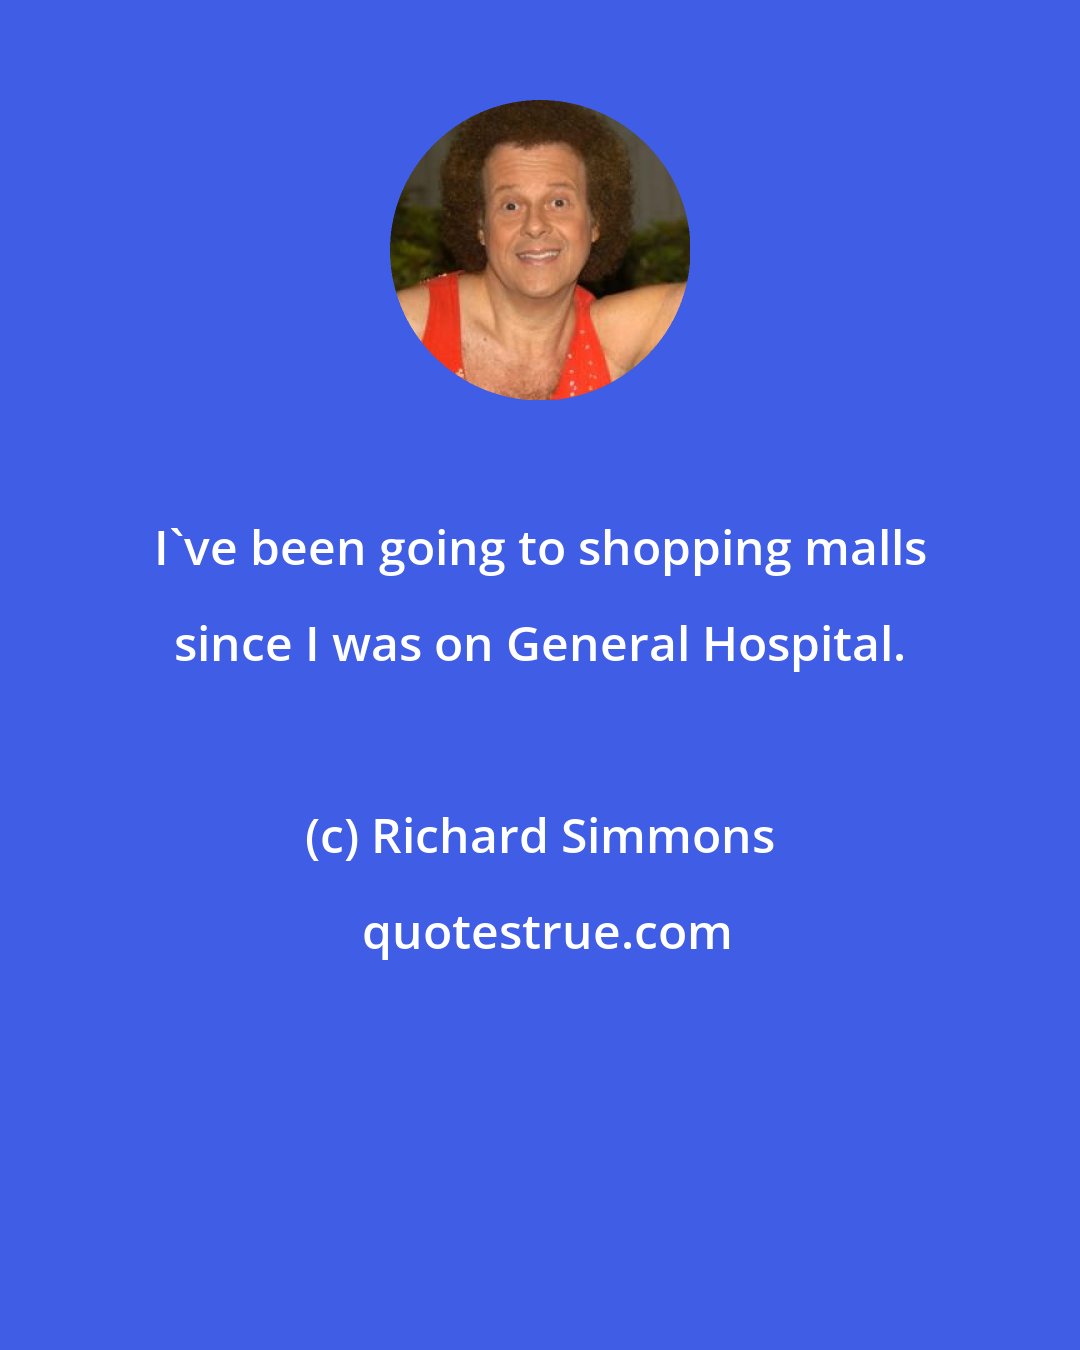 Richard Simmons: I've been going to shopping malls since I was on General Hospital.